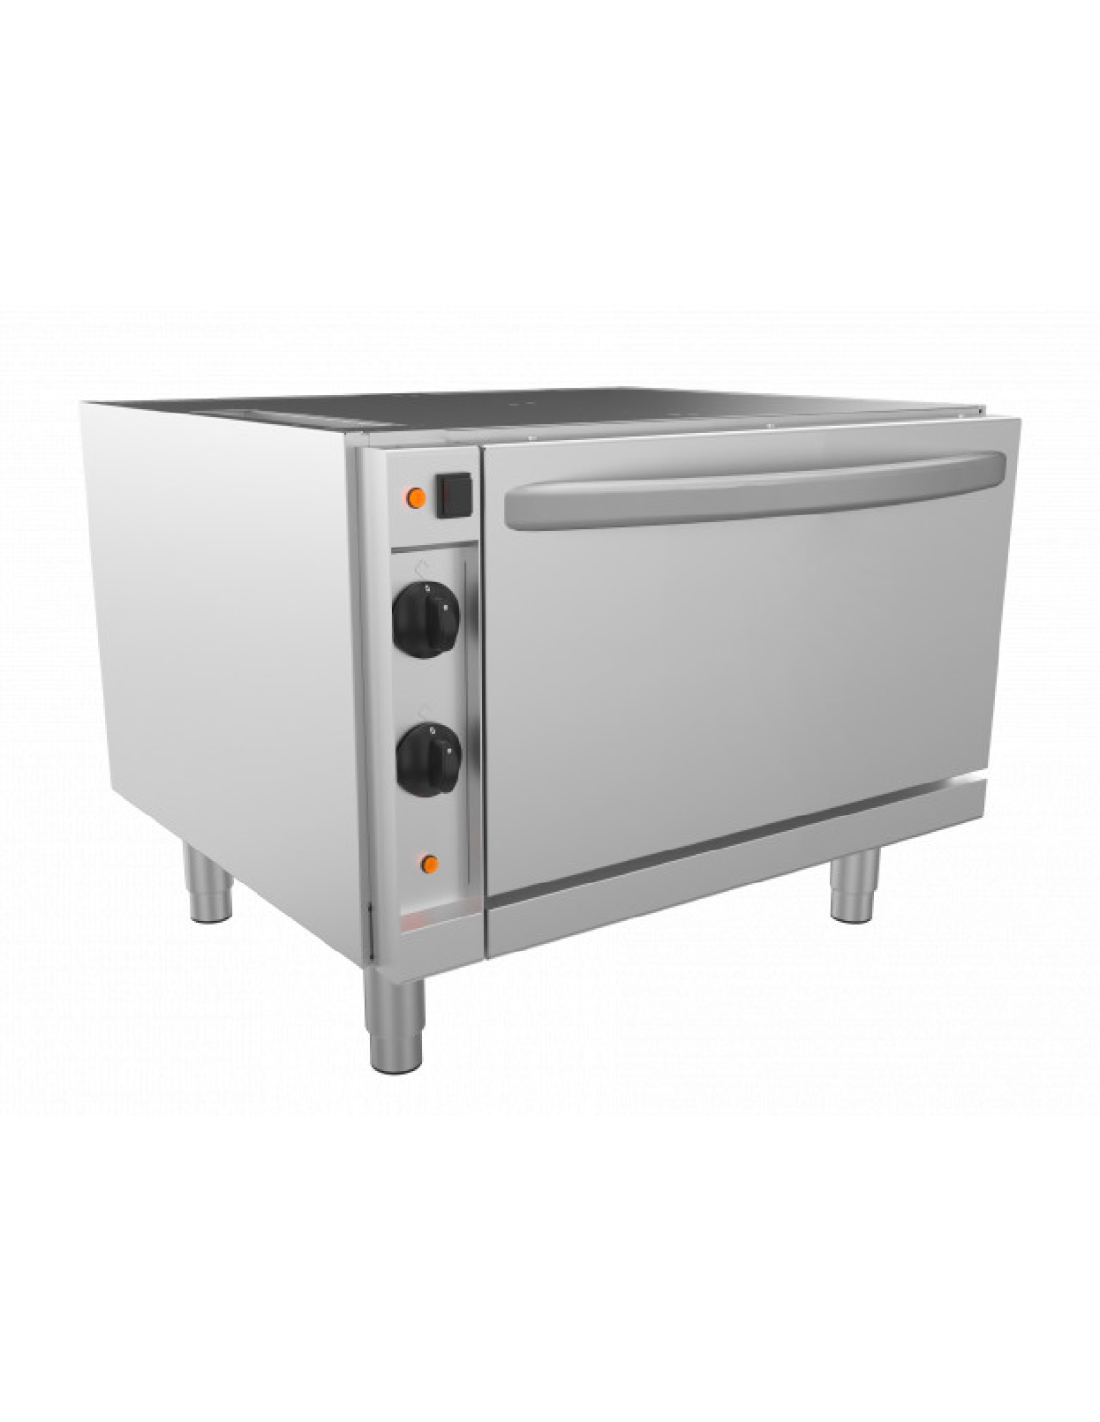 Base on static electric oven GN 1/1 - Temperature 110° to 280°C - 380/415V-3N - 4200 kw - cm 80 x 64.5 x 62 h